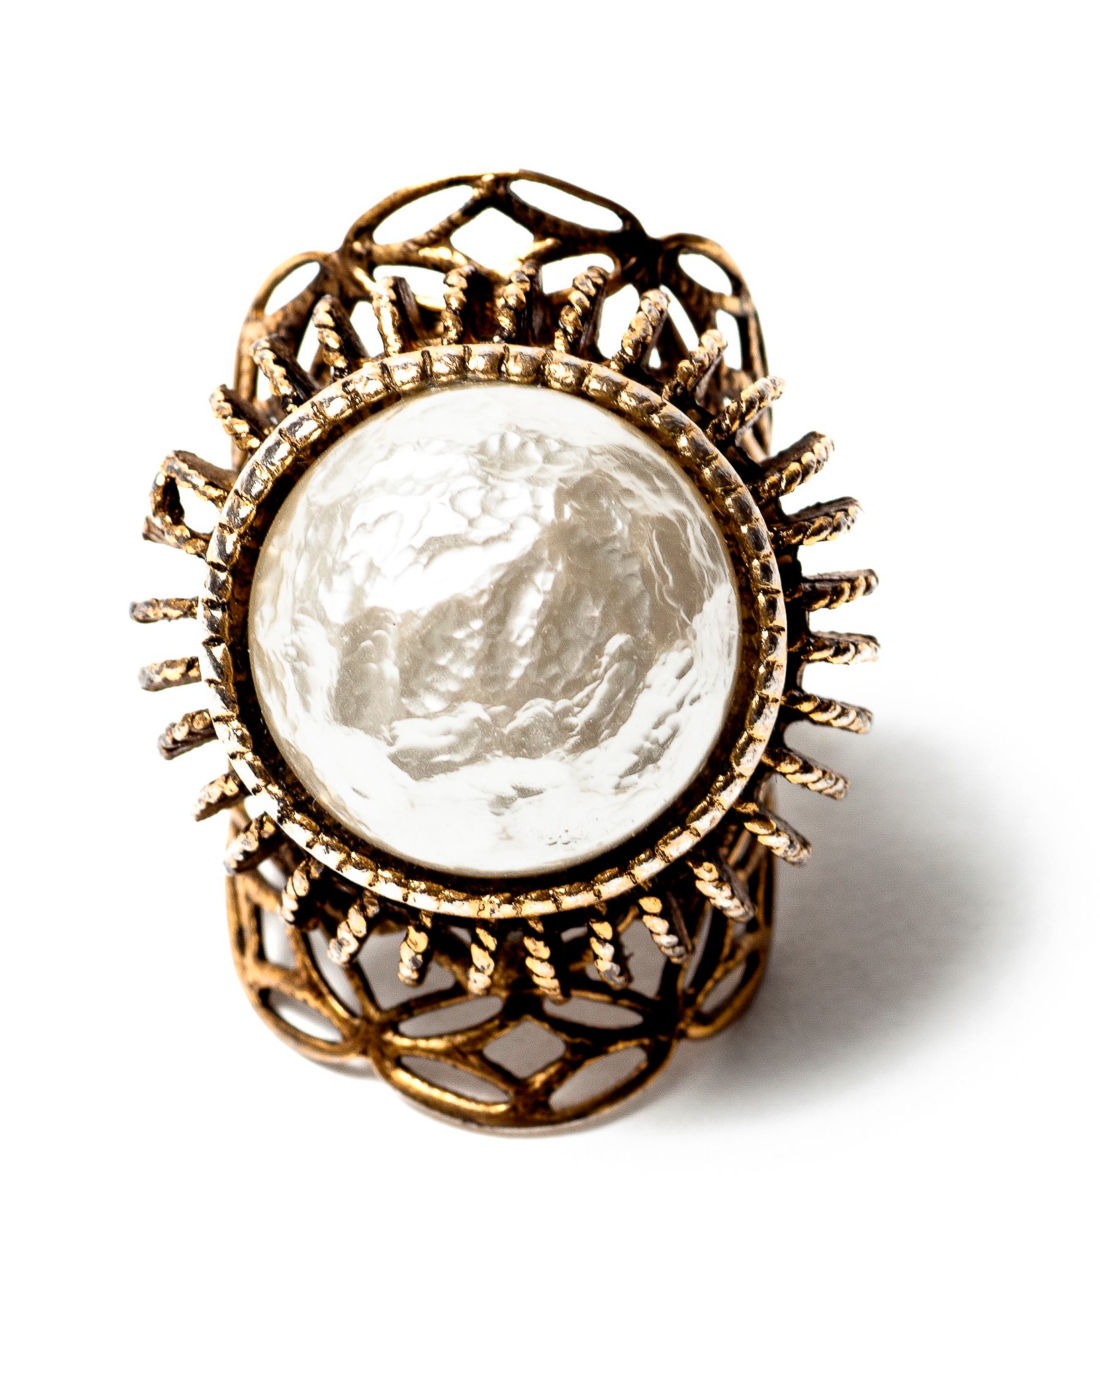 Japanese Baroque Pearl Framed Victorian Revival Statement Ring, circa 1960's